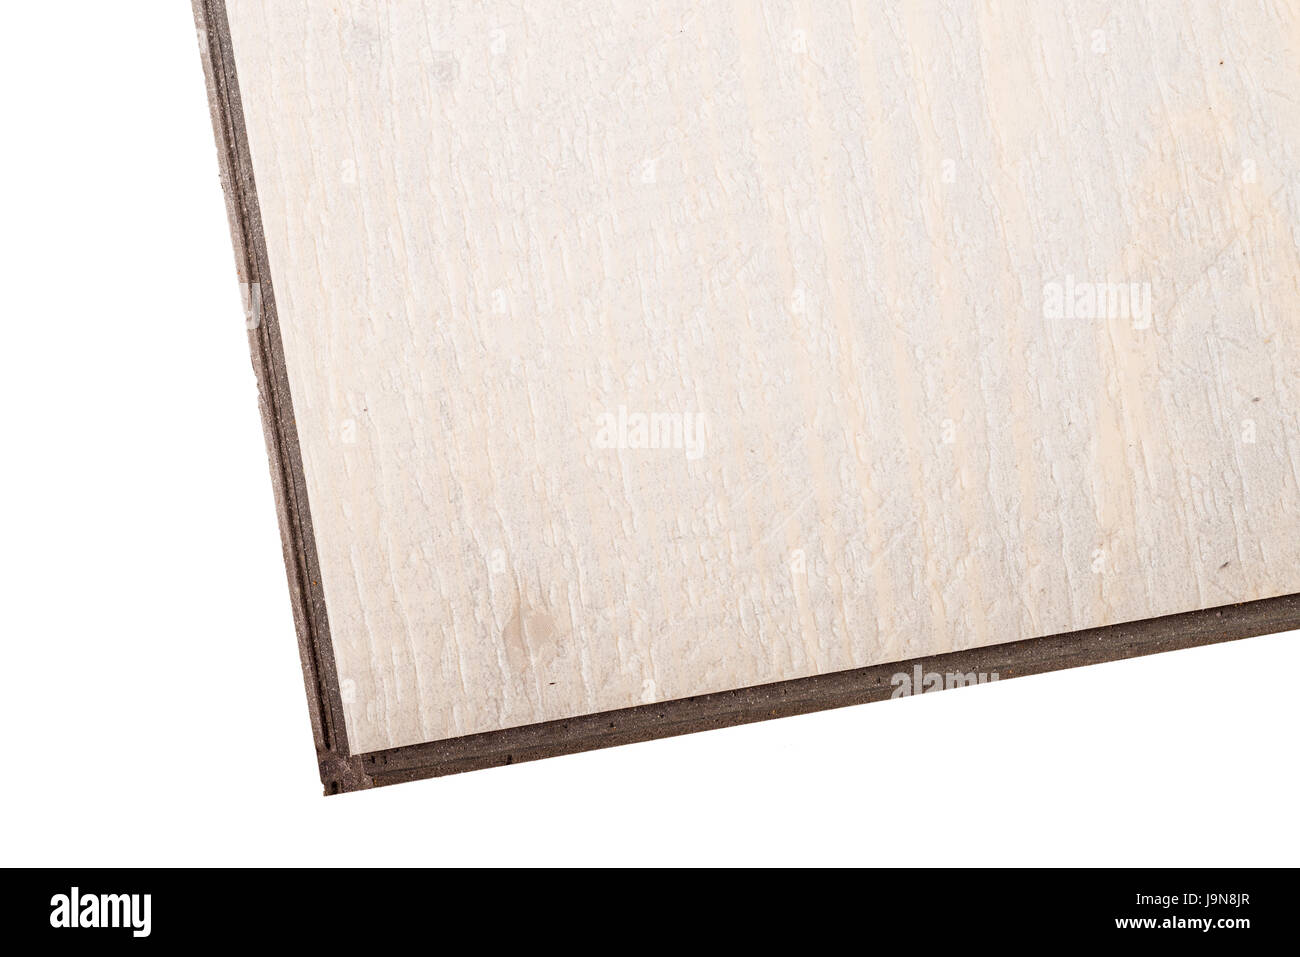 Detail take of a vinyl floating flooring tile whit its lip and grooves to click into each other Stock Photo